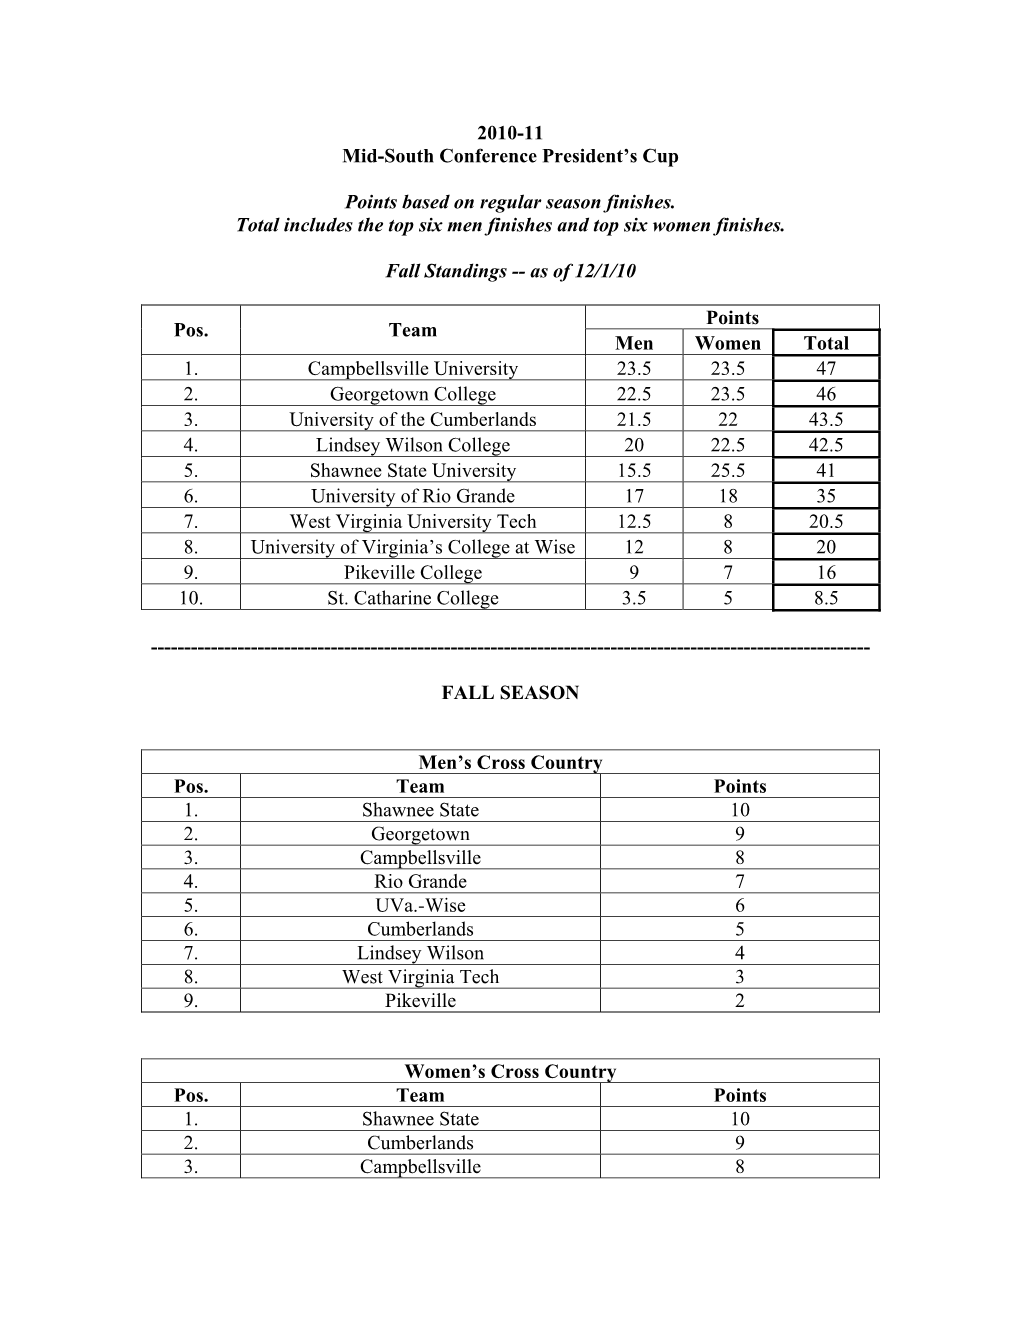 2010-11 Mid-South Conference President's Cup Points Based On